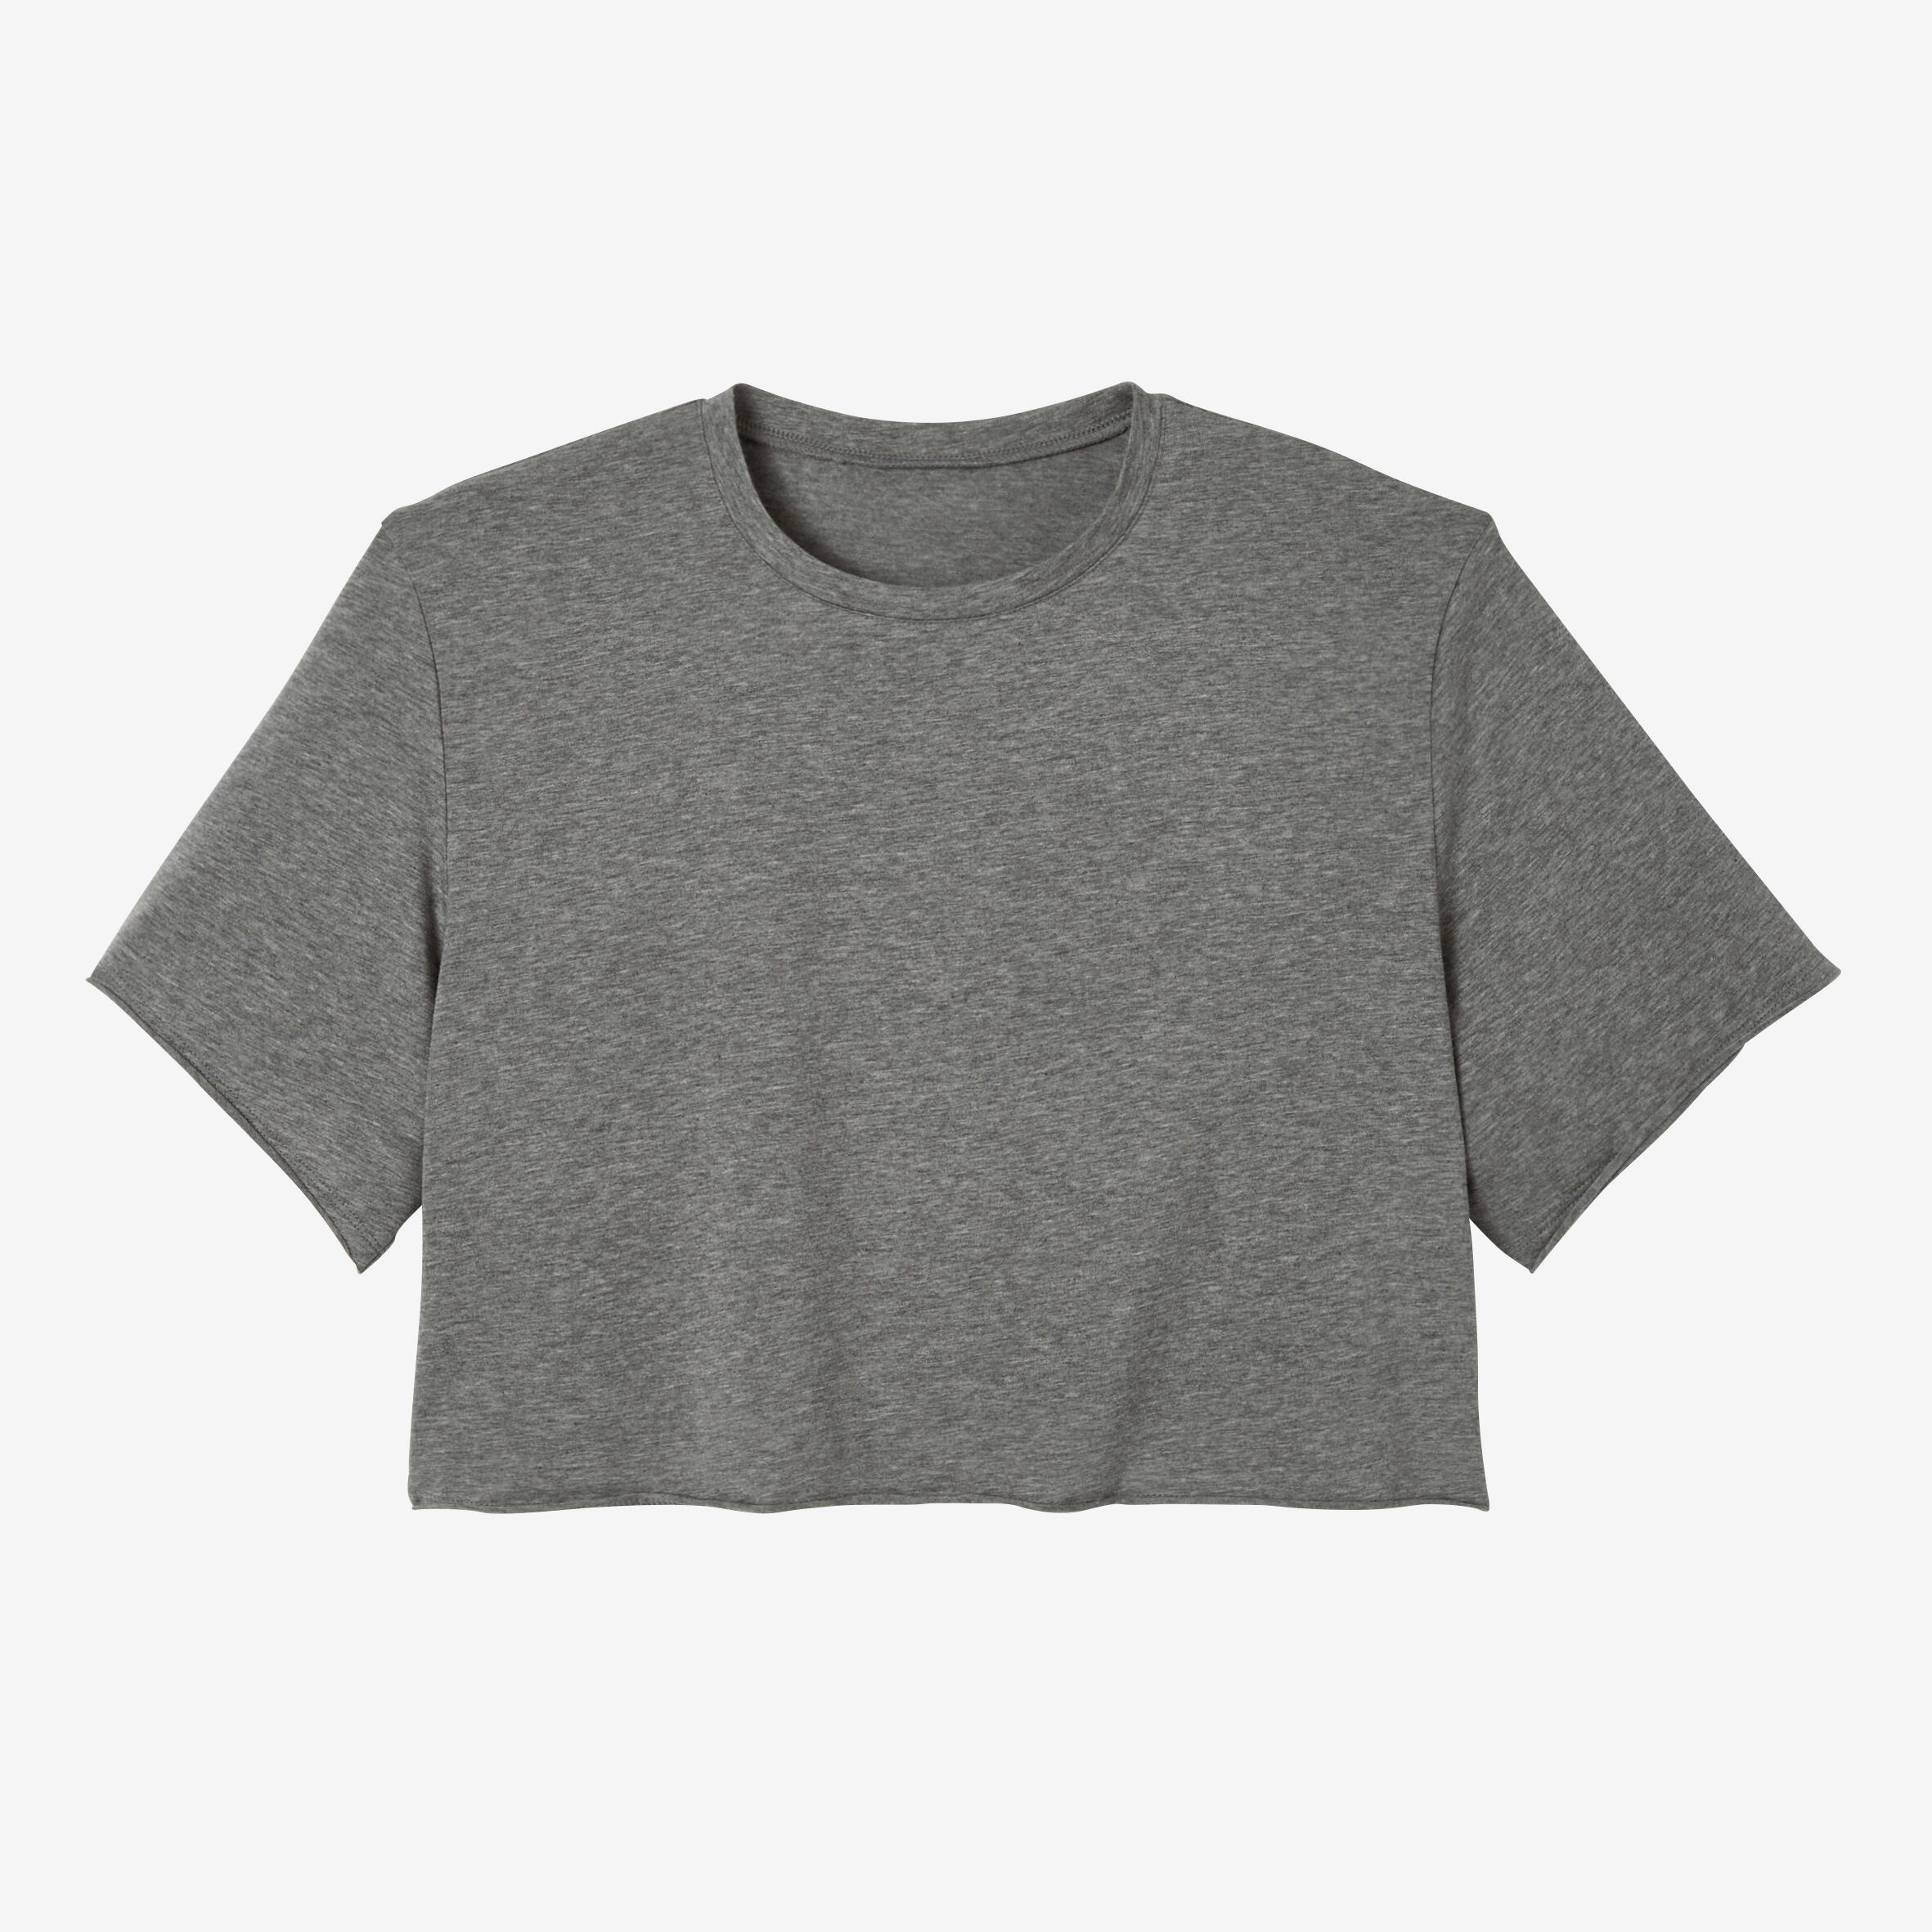 Women's Fitness Cropped T-Shirt 520 - Grey 6/6